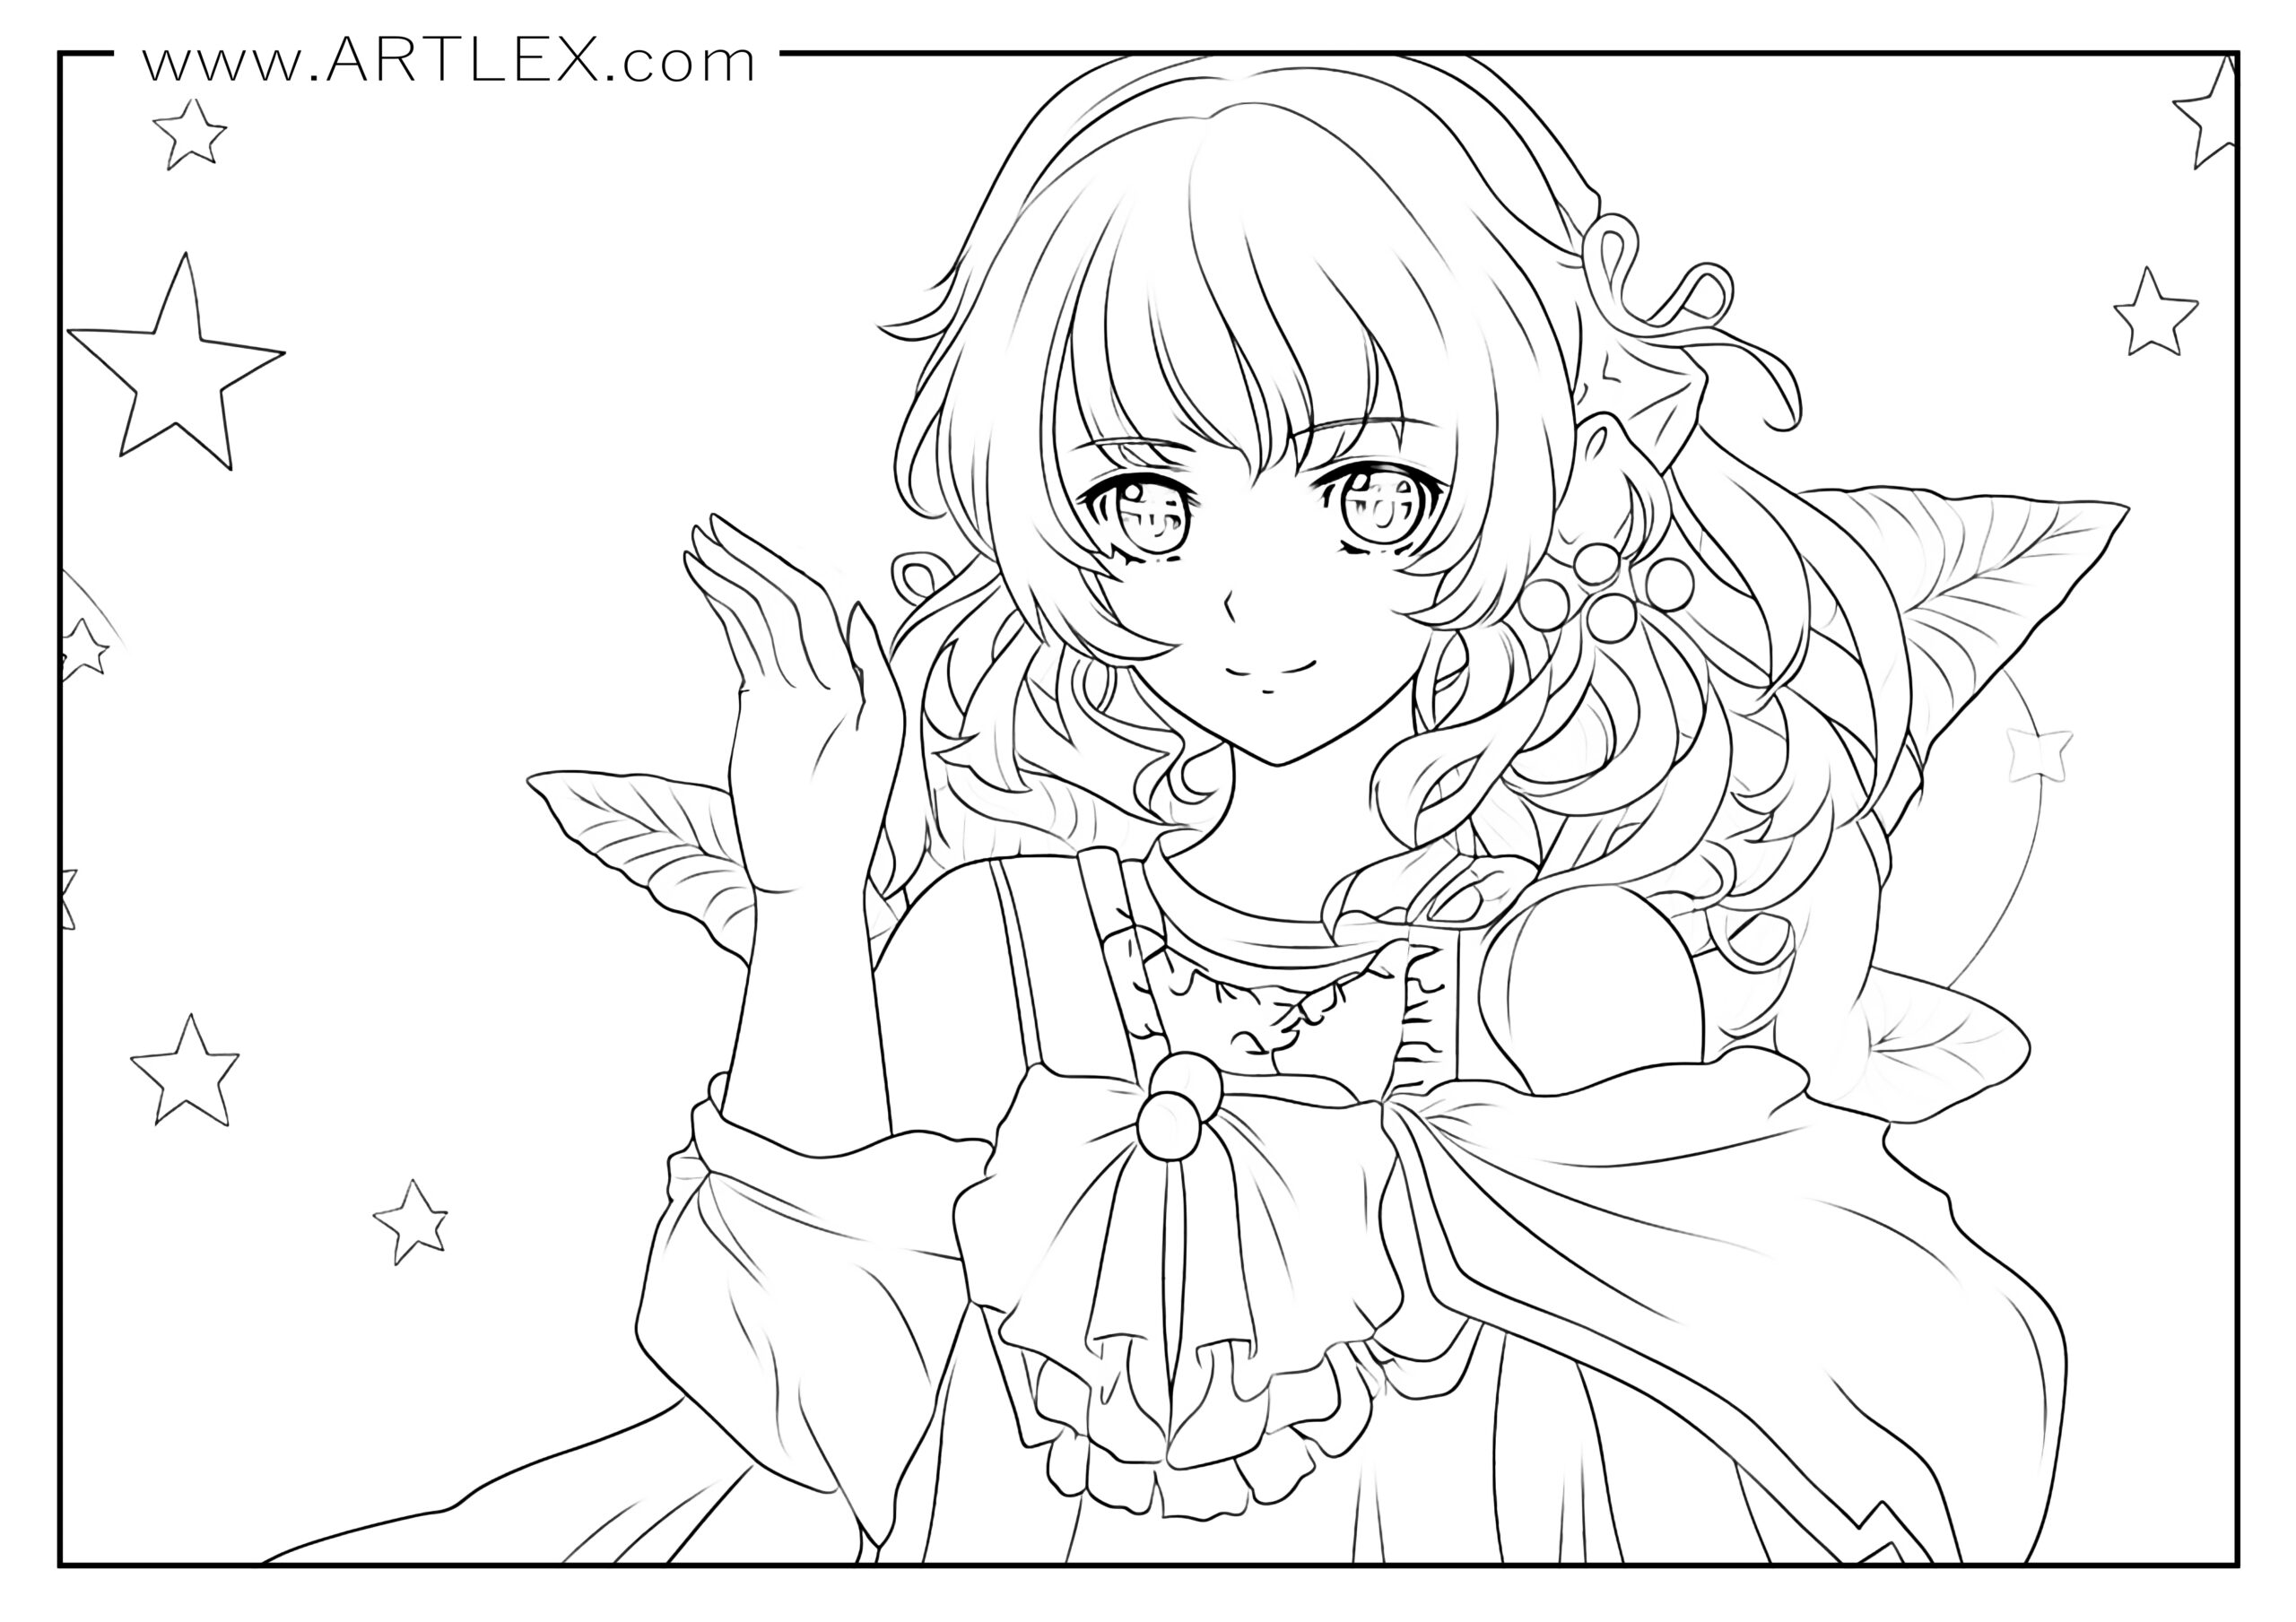 17 Anime Coloring Pages (Free + Printable) – Artlex